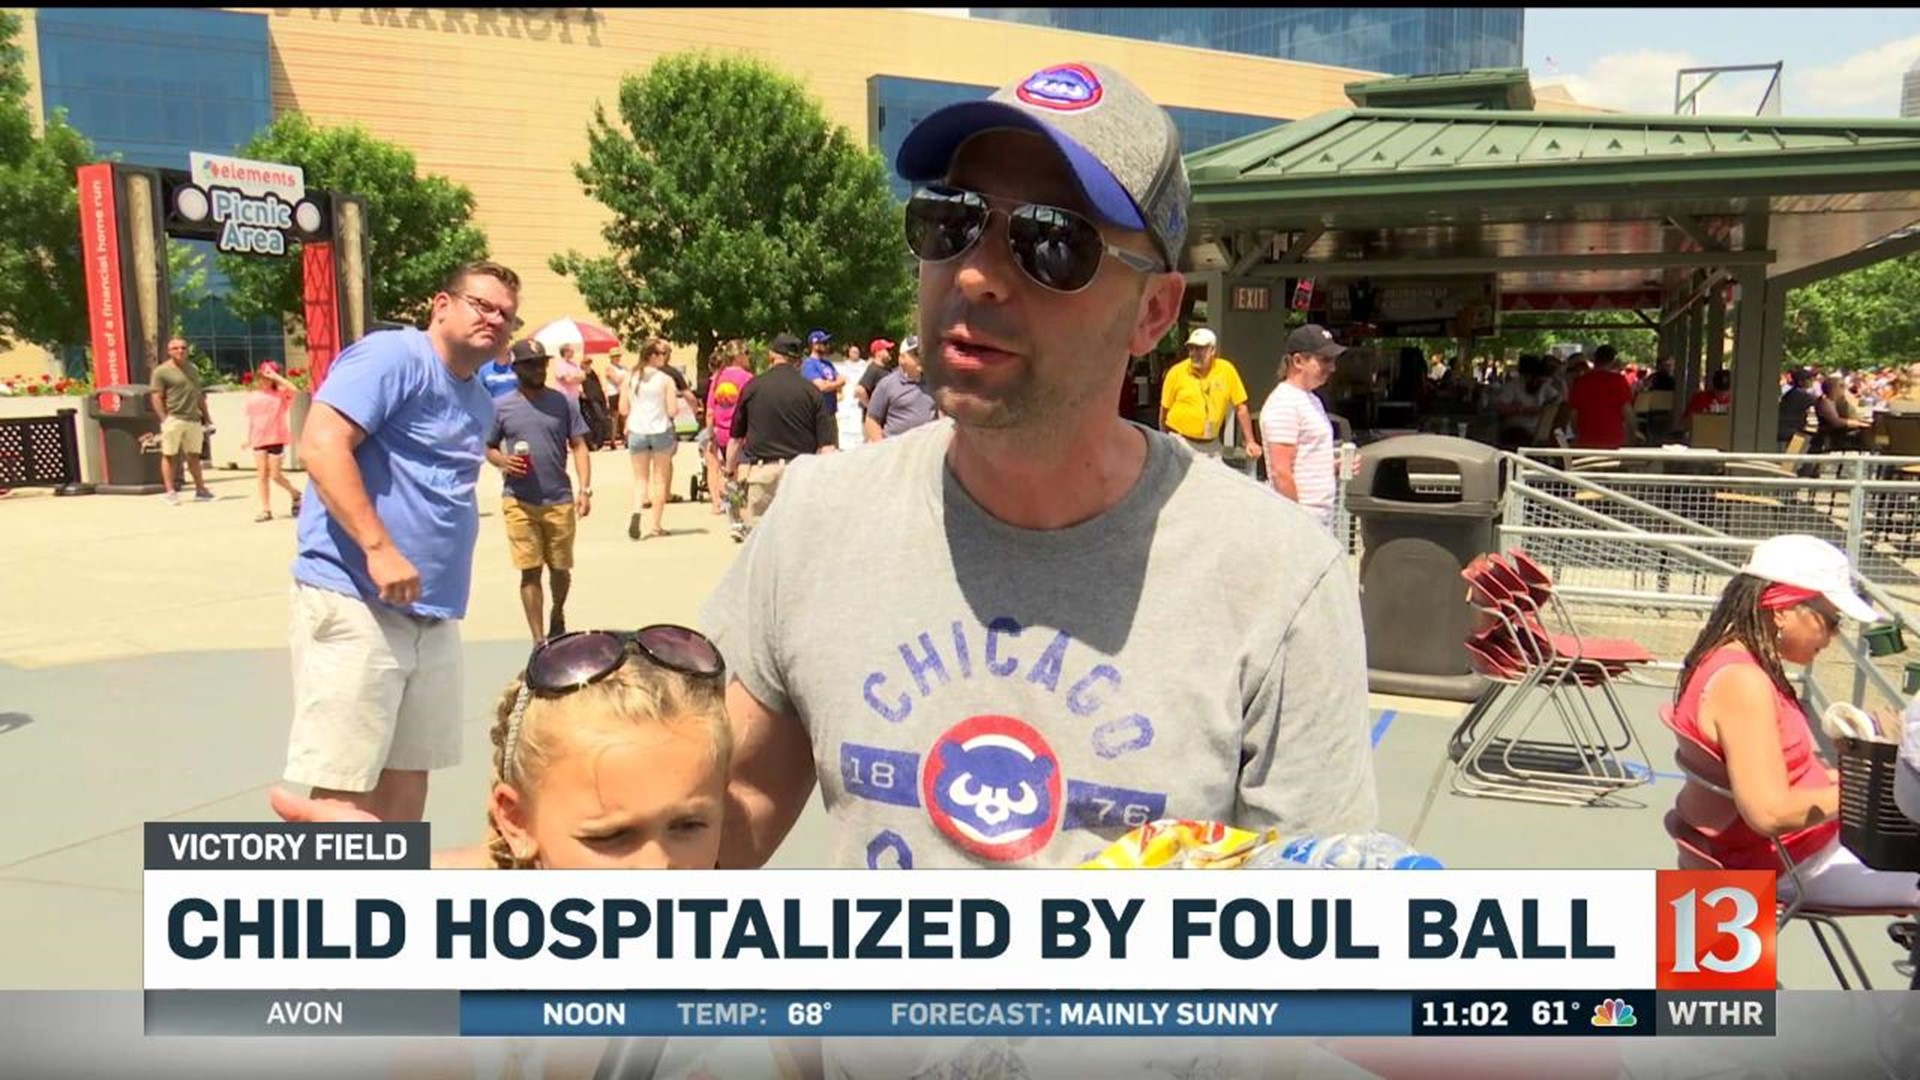 Child Hospitalized by Foul Ball